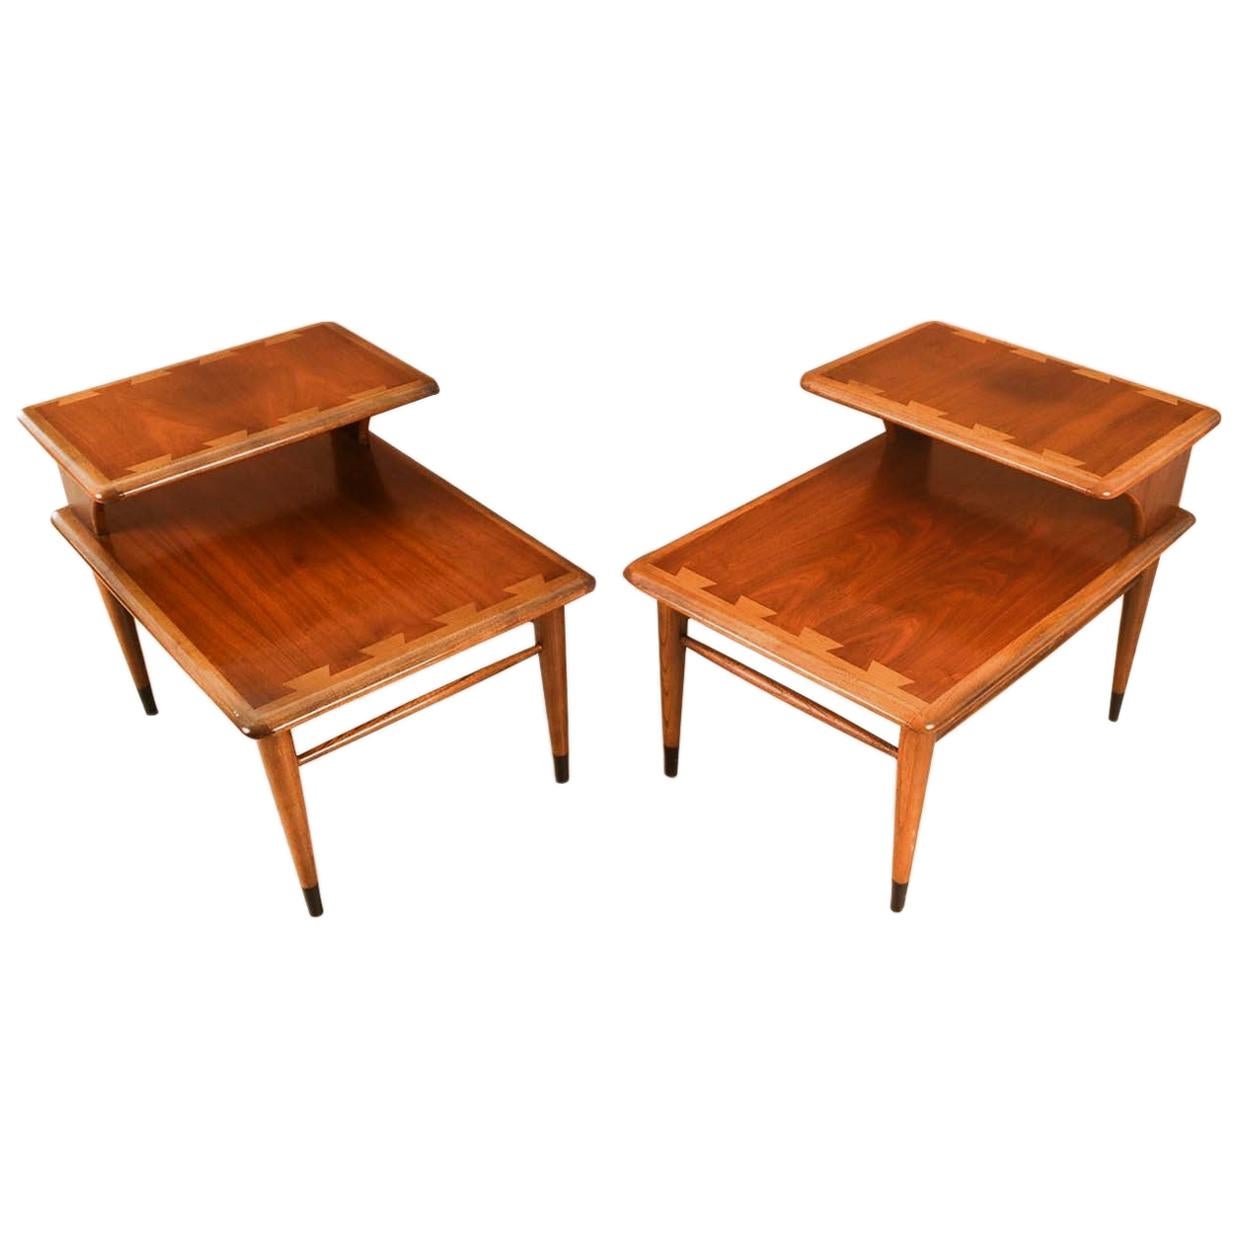 Midcentury Lane Acclaim Dovetail Two-Tier End Tables Pair